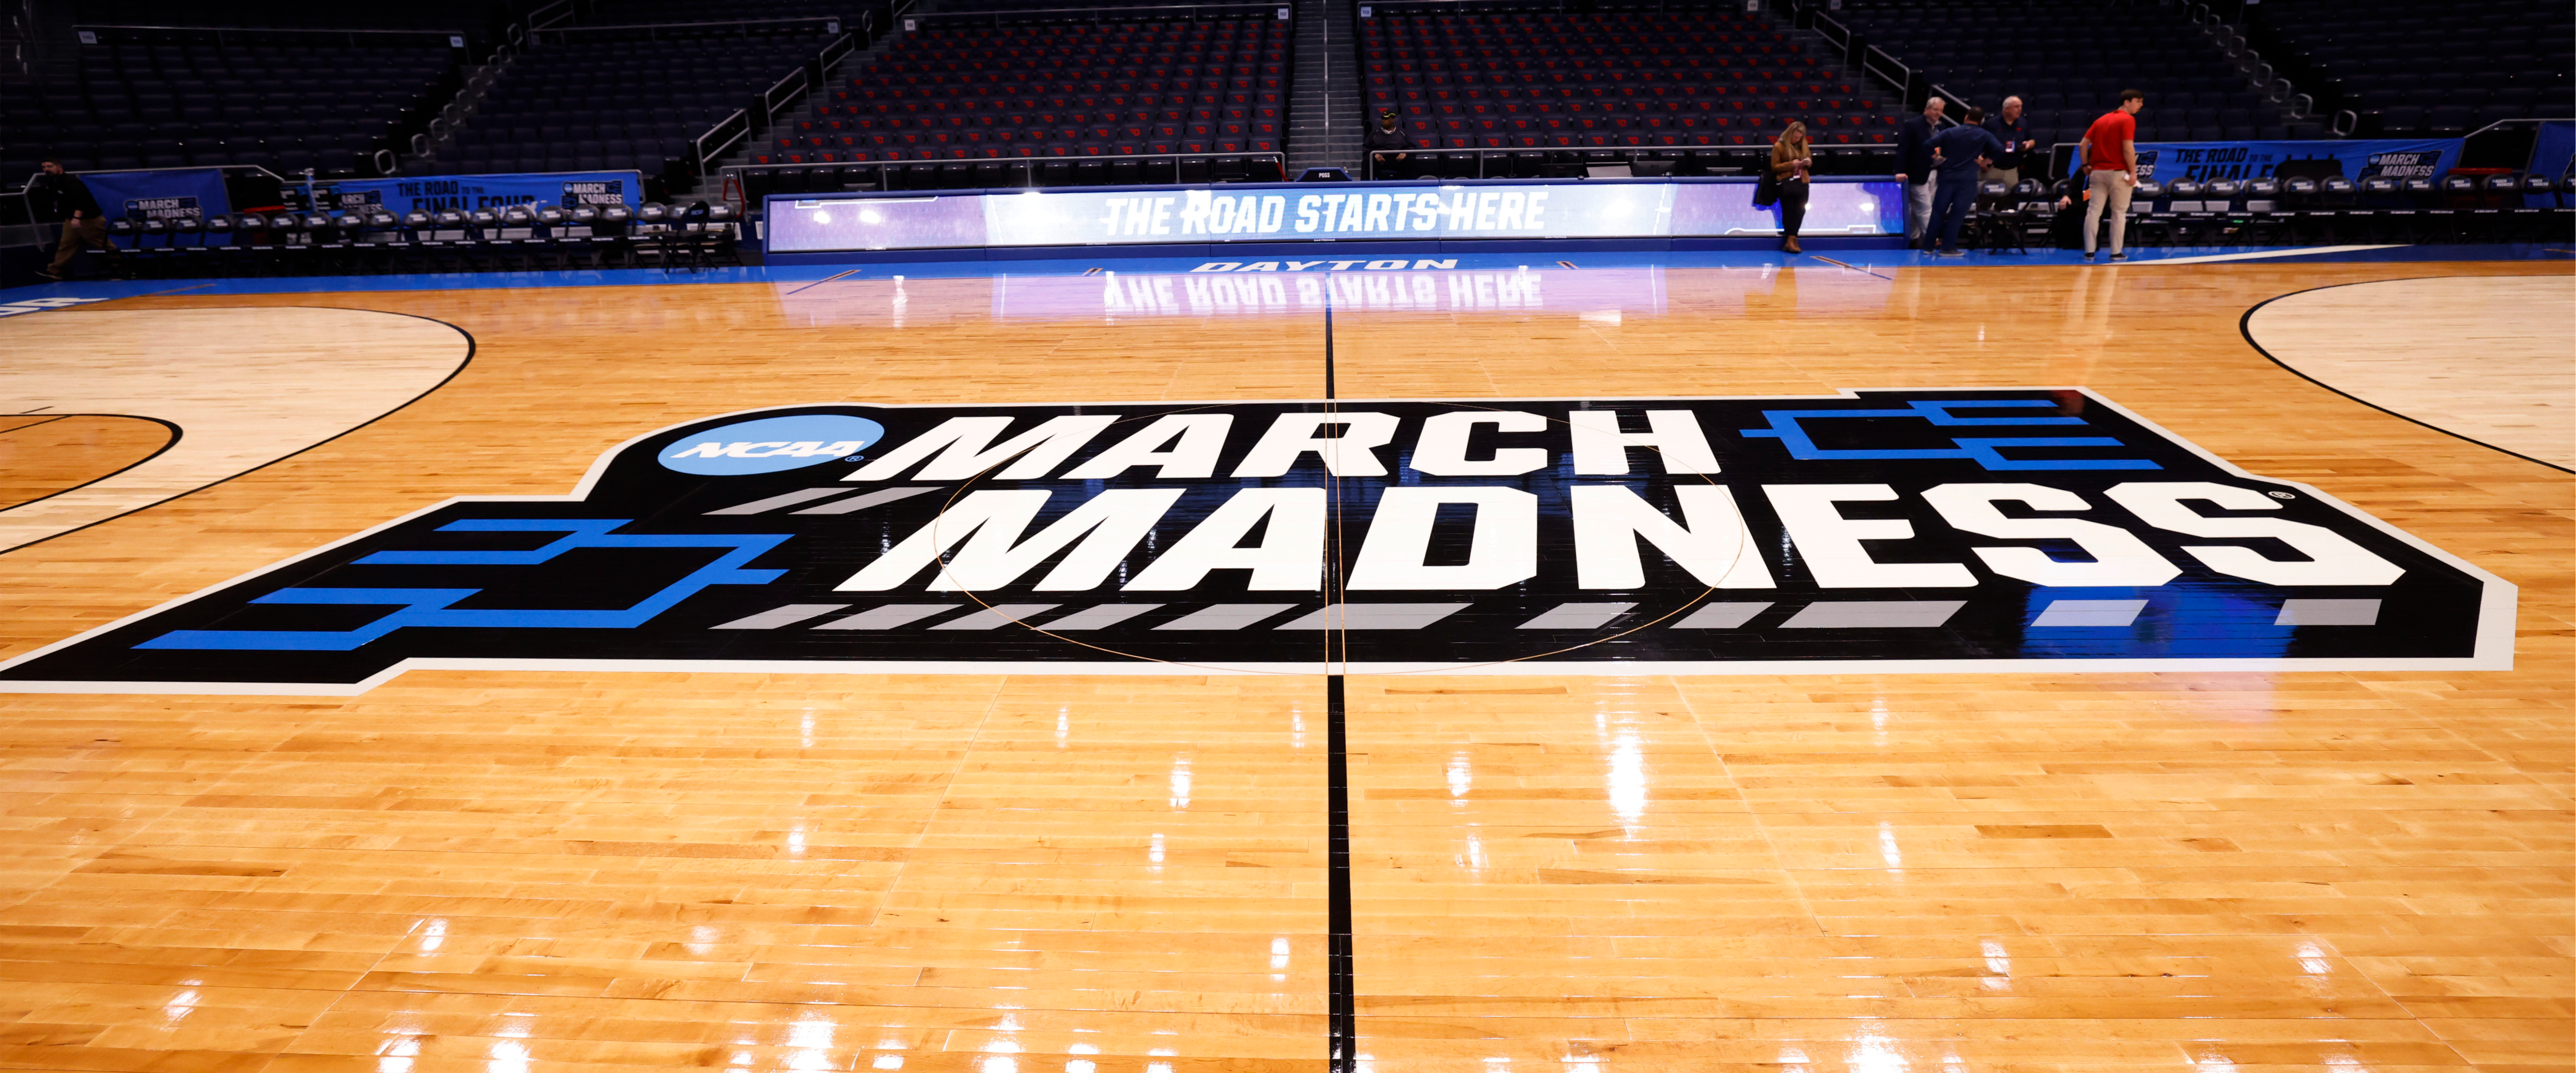 March Madness: Ranking the regions from most interesting to least